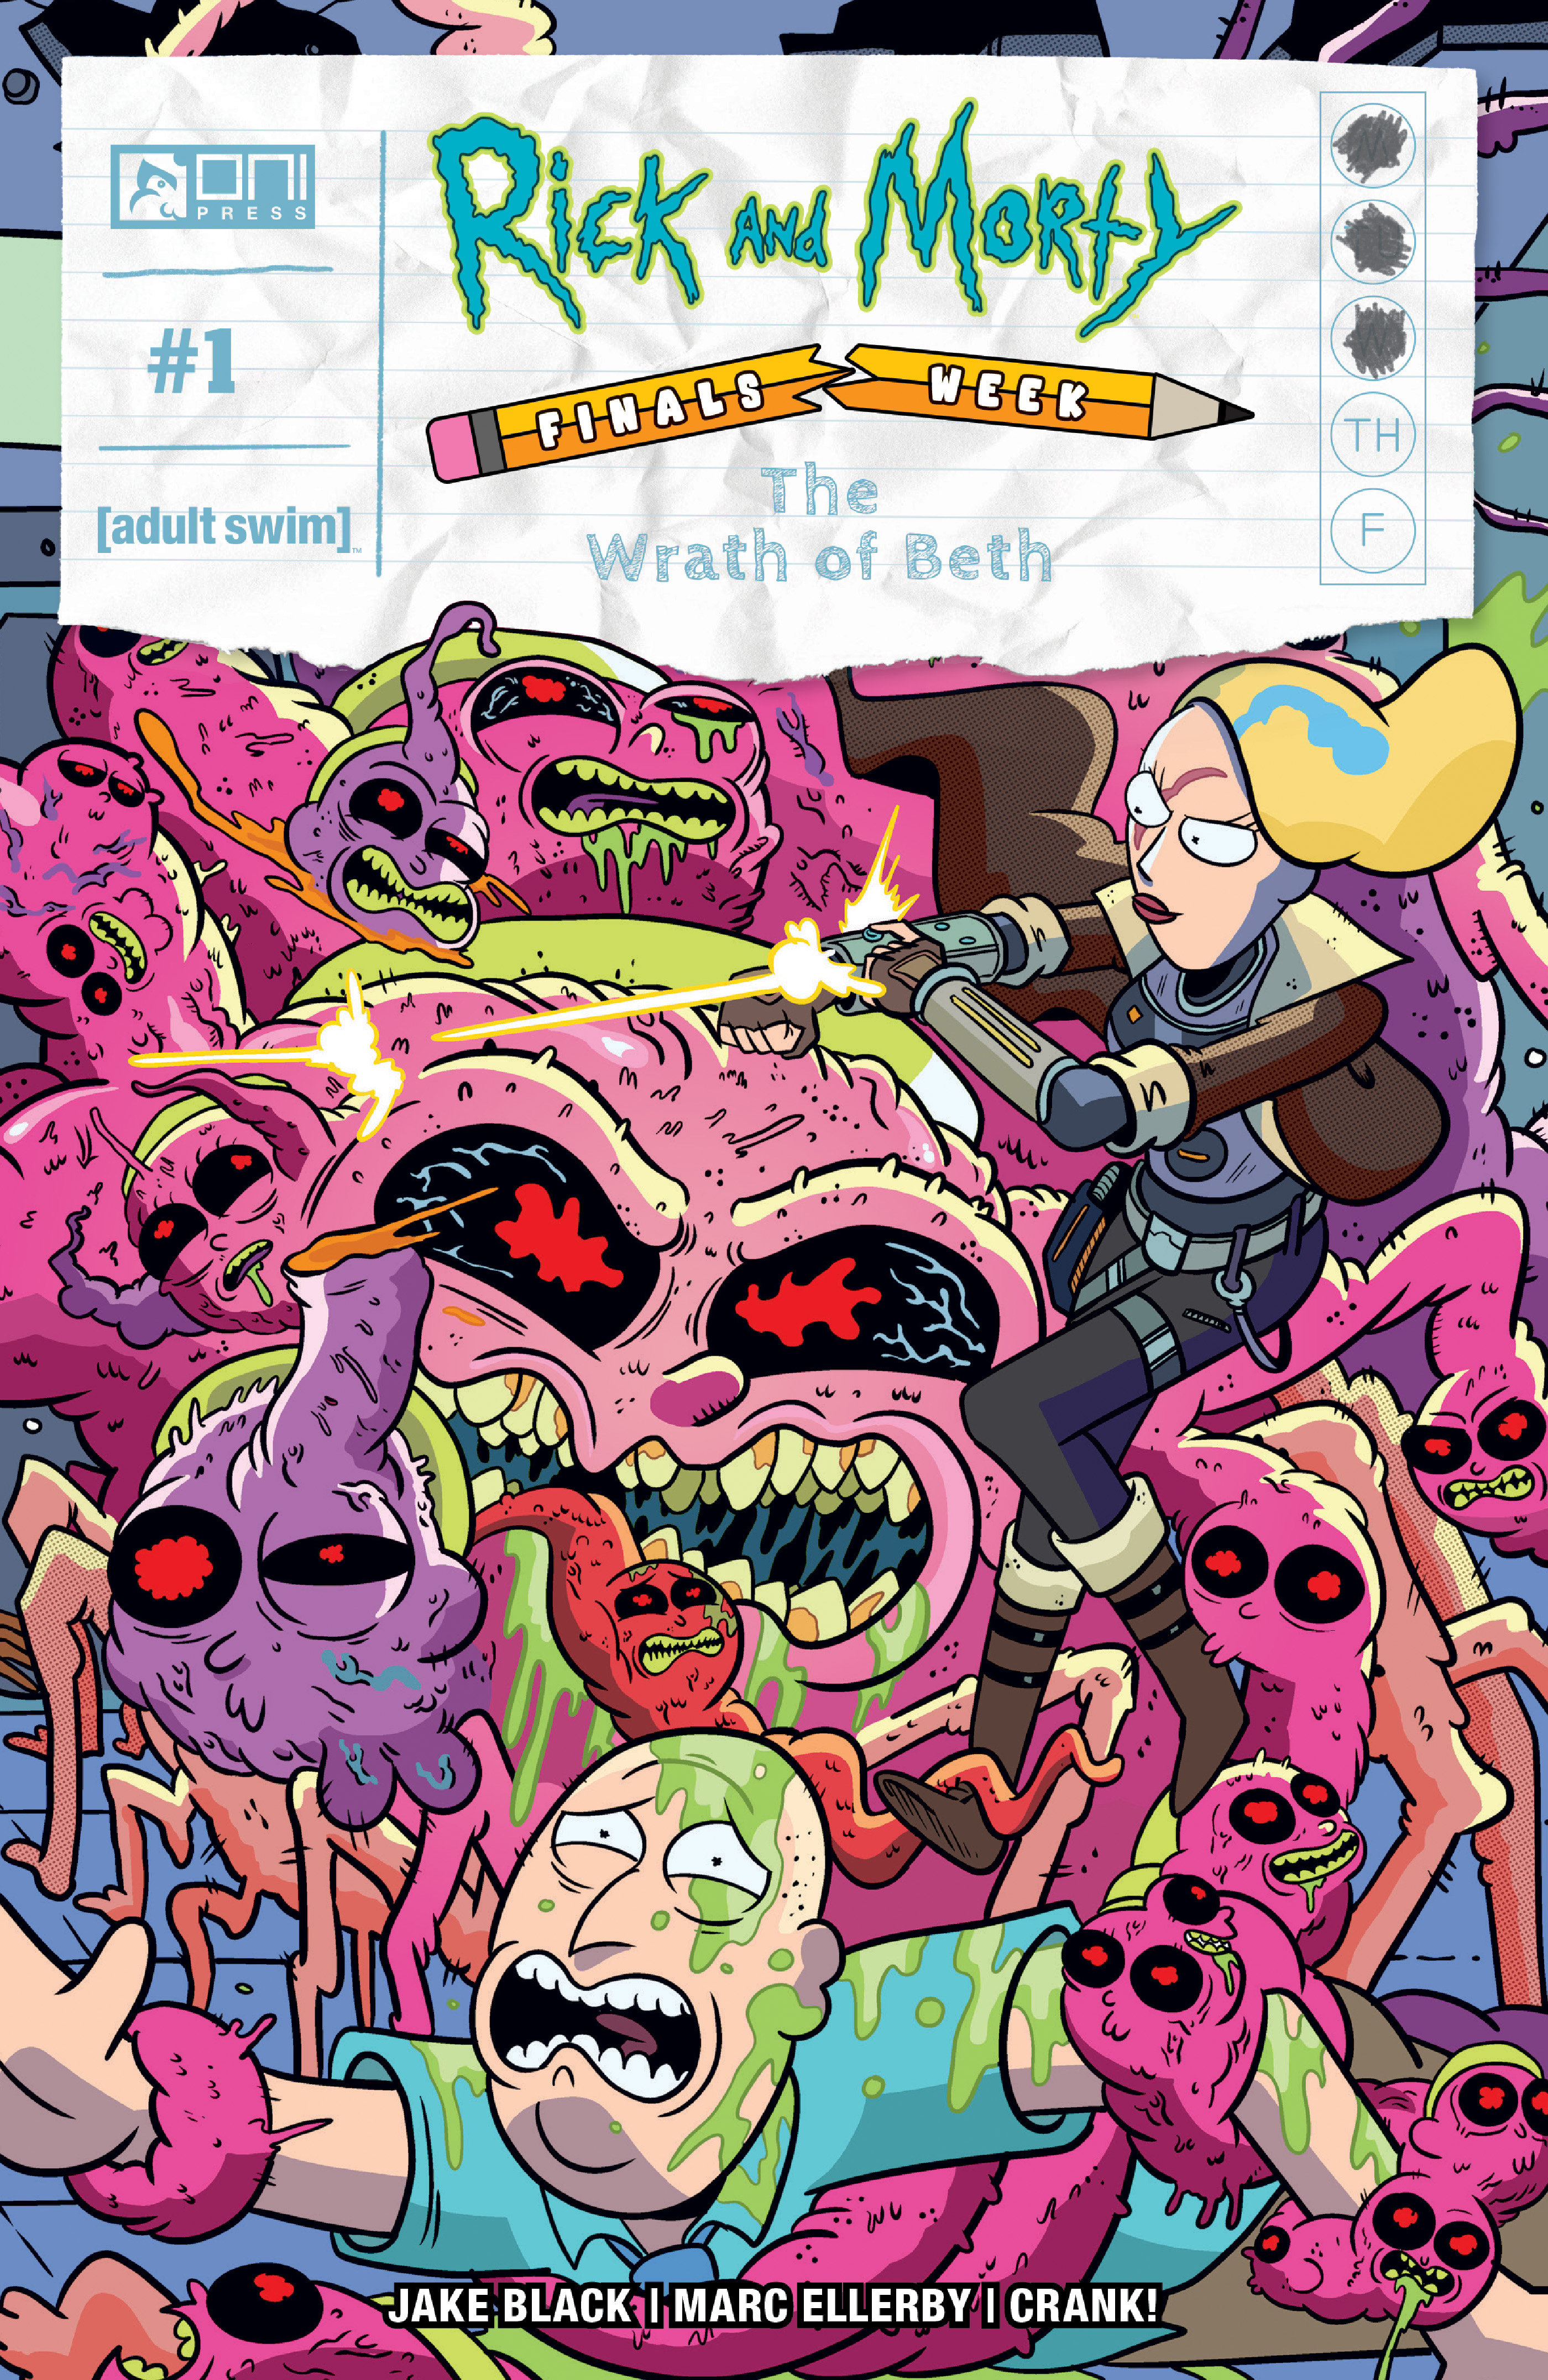 Rick and Morty Finals Week the Wrath of Beth #1 Cover C 1 for 10 Incentive Marc Ellerby Interconnecting Cover Variant